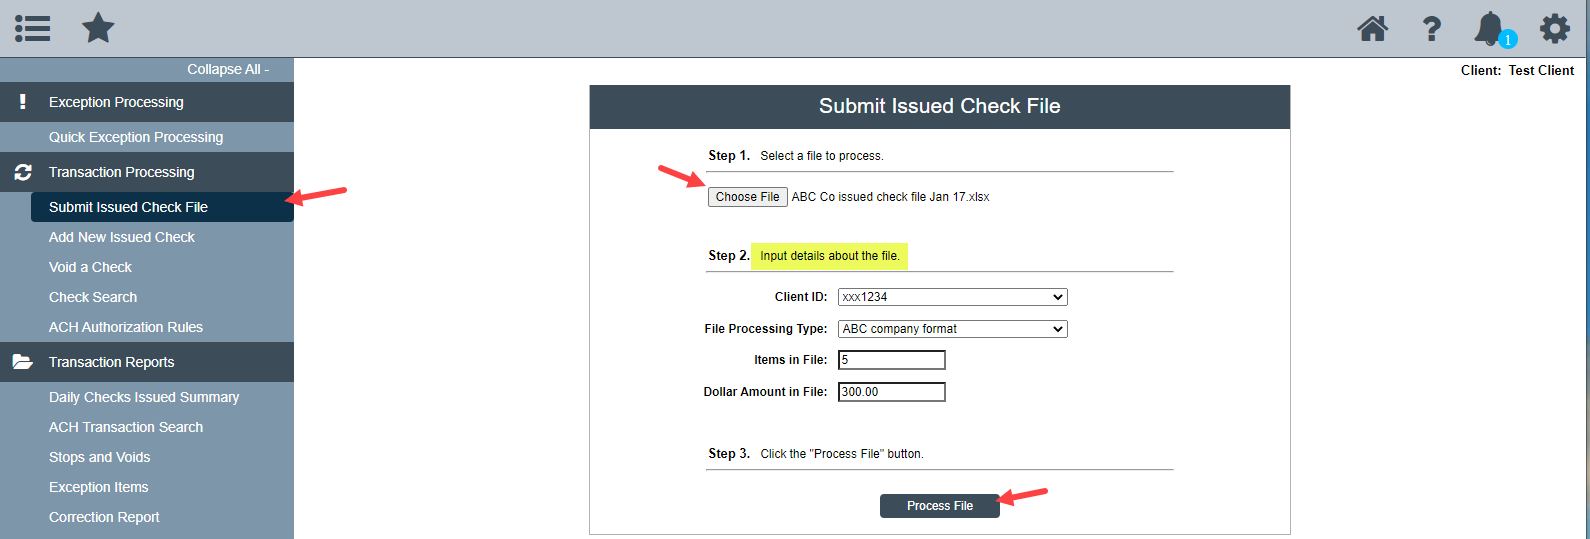 Select Submit Issued Check File